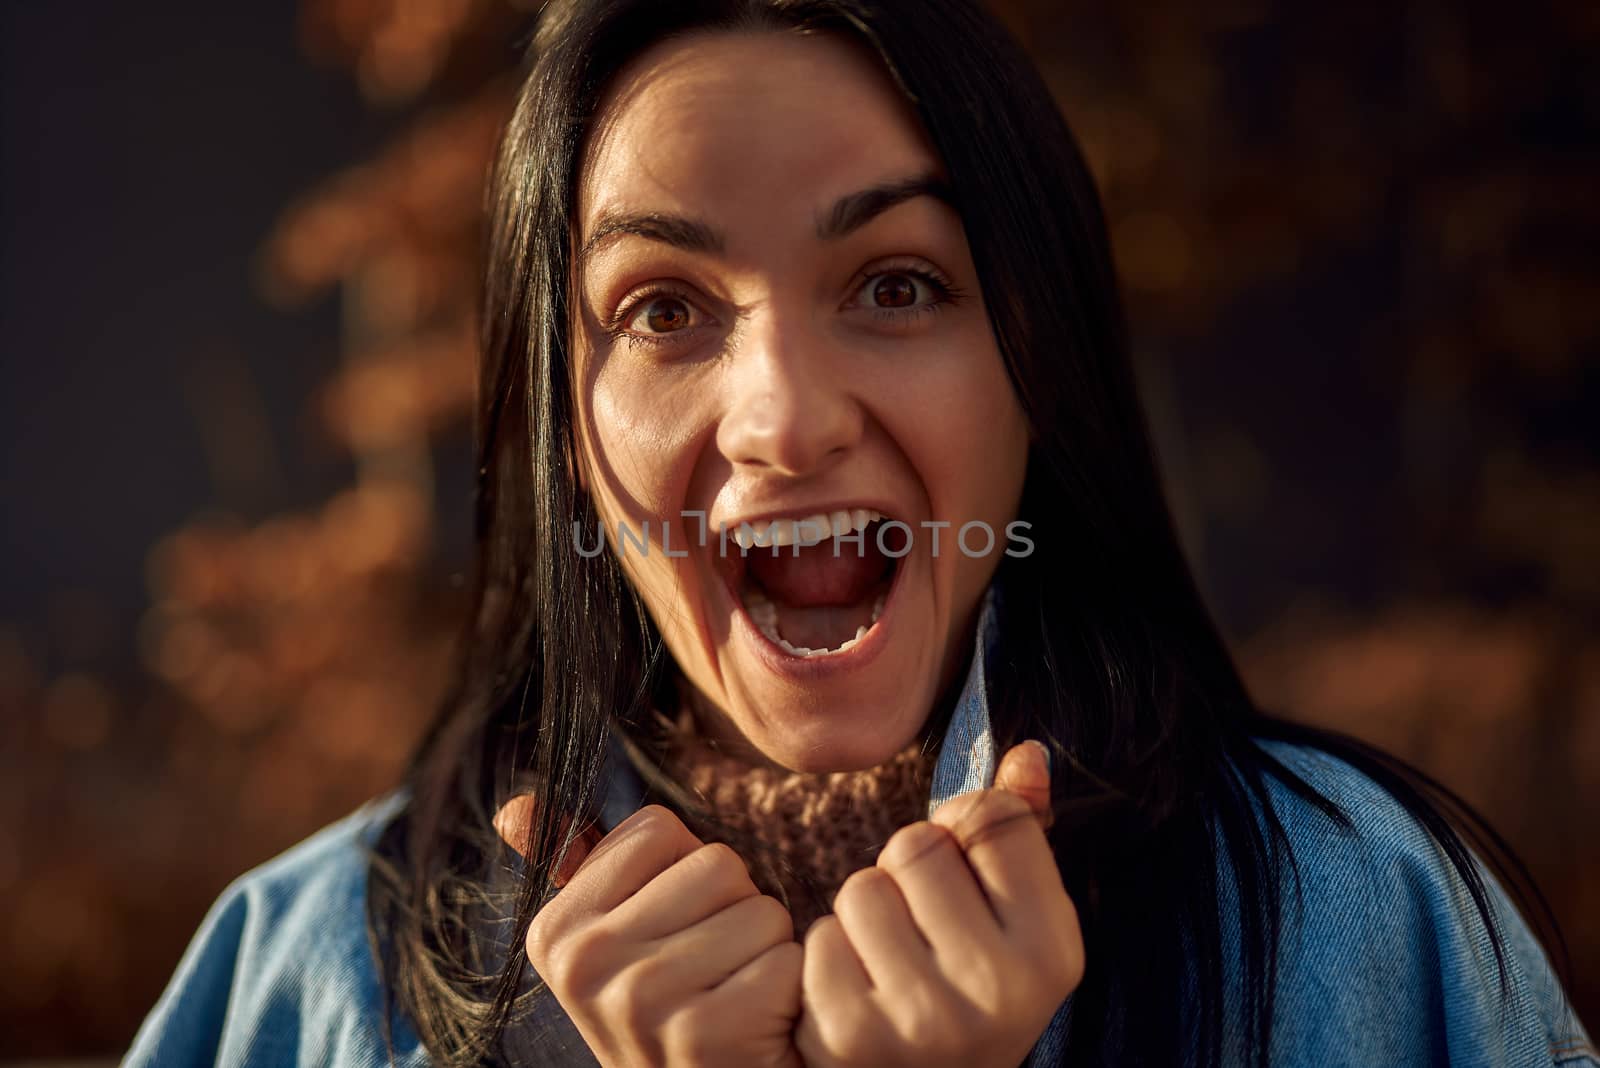 Close up portrait of a young adorable woman yelling happily while holding tightly the collar of her denim jacket